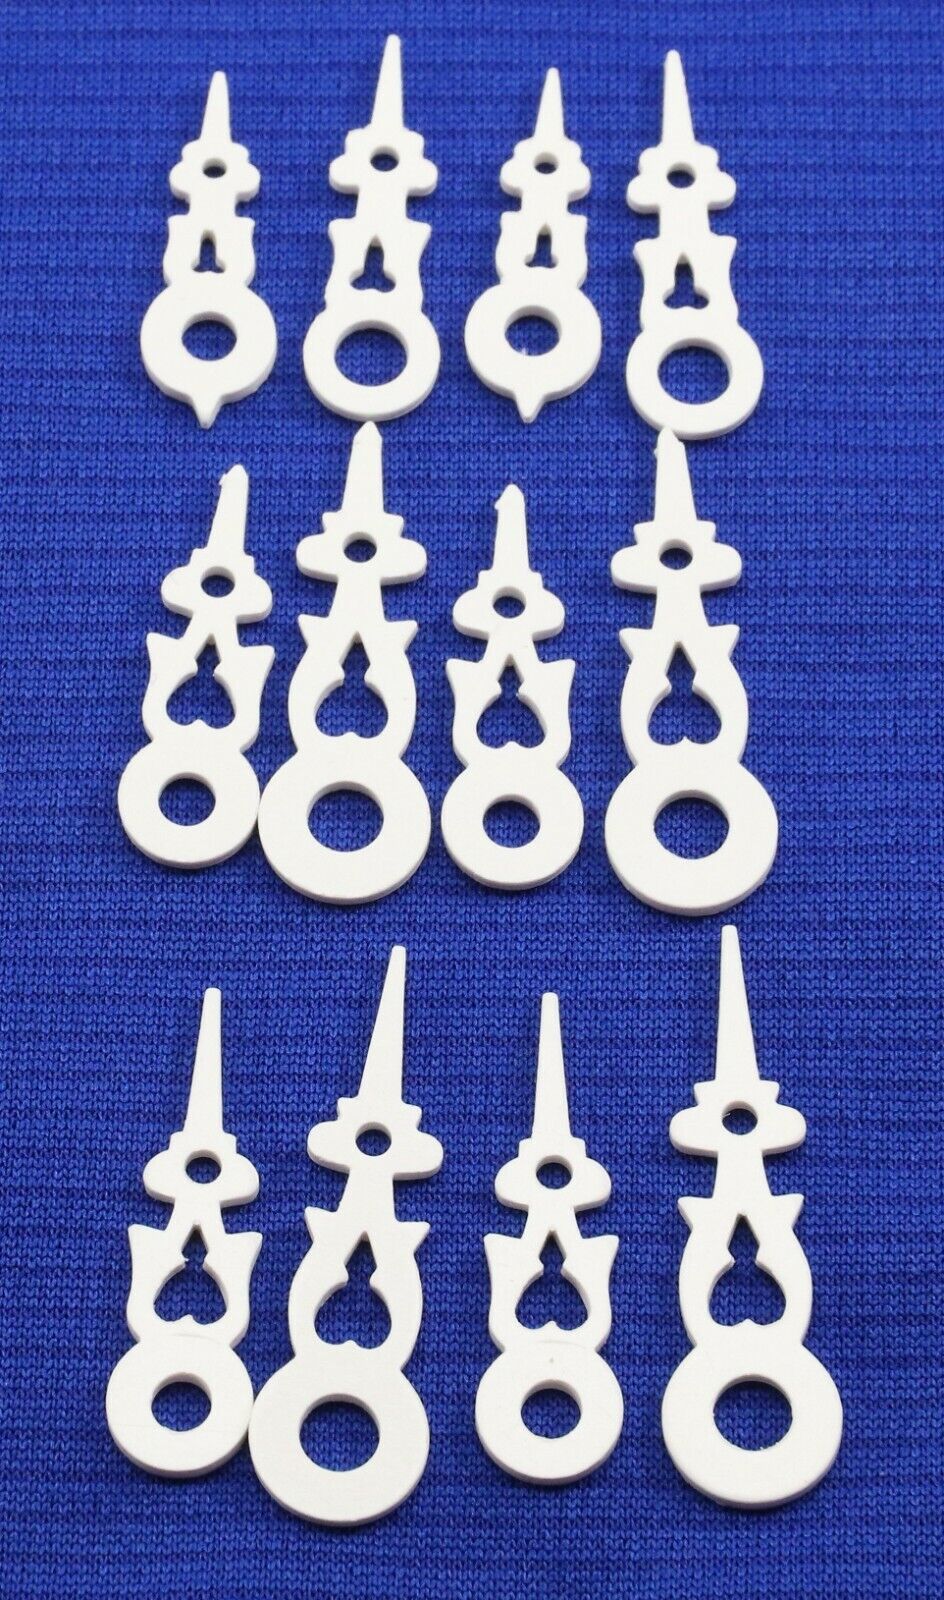 Cuckoo Clock Hand Assortment 6 Sets White Color for 60 to 80 mm Dials Regula